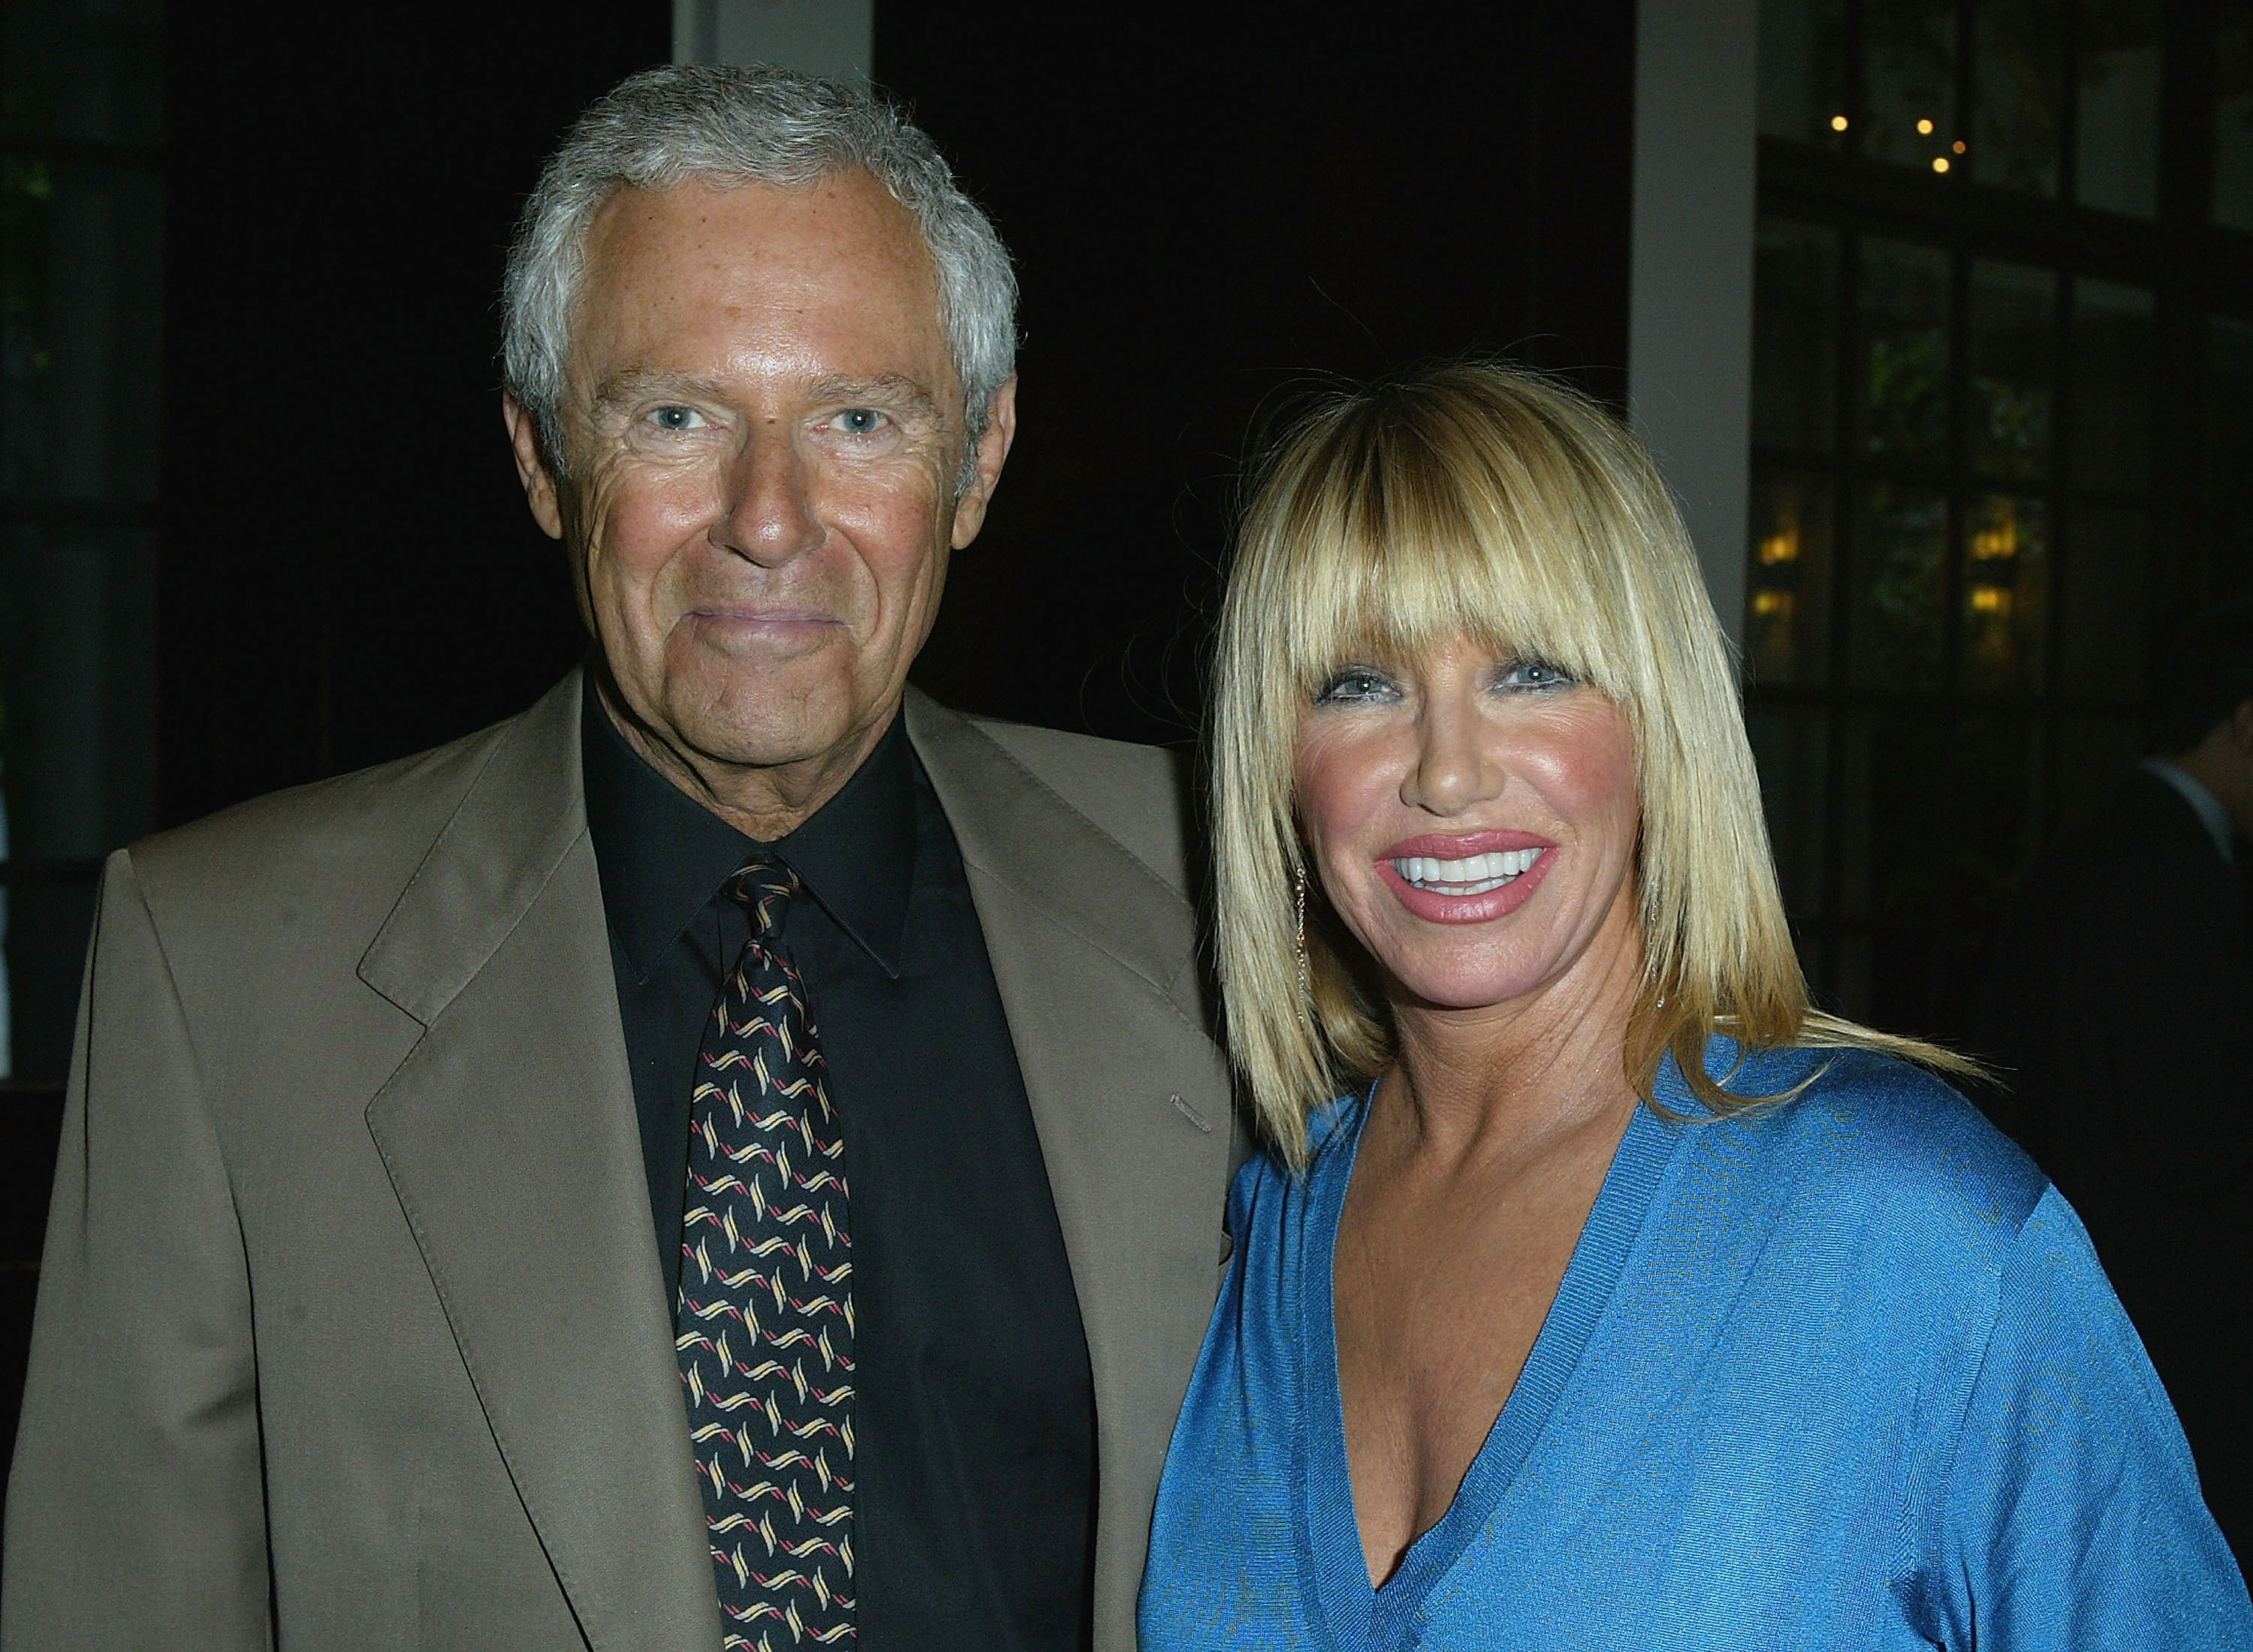 Alan Hamel and Suzanne Somers attend the How To Win The War Against Terrorism - A Discussion And Cocktail Party on June 8, 2004 in Bel Air, California | Source: Getty Images